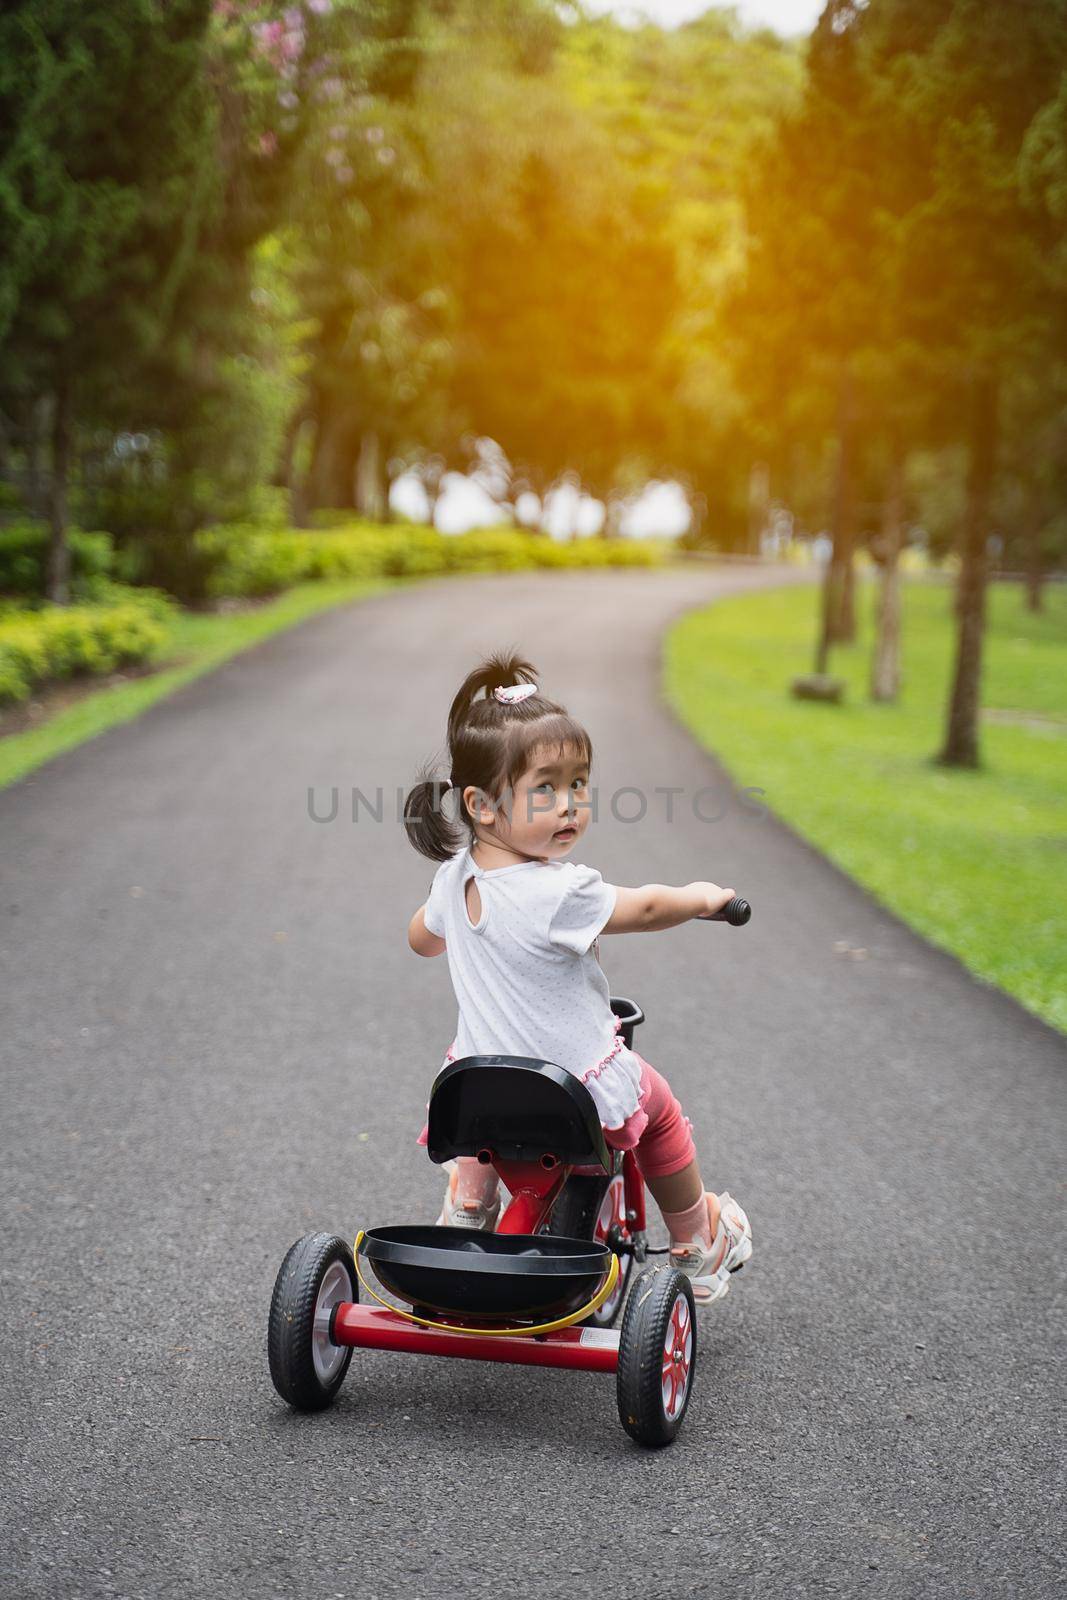 cute baby riding bicycle in the garden by Wmpix